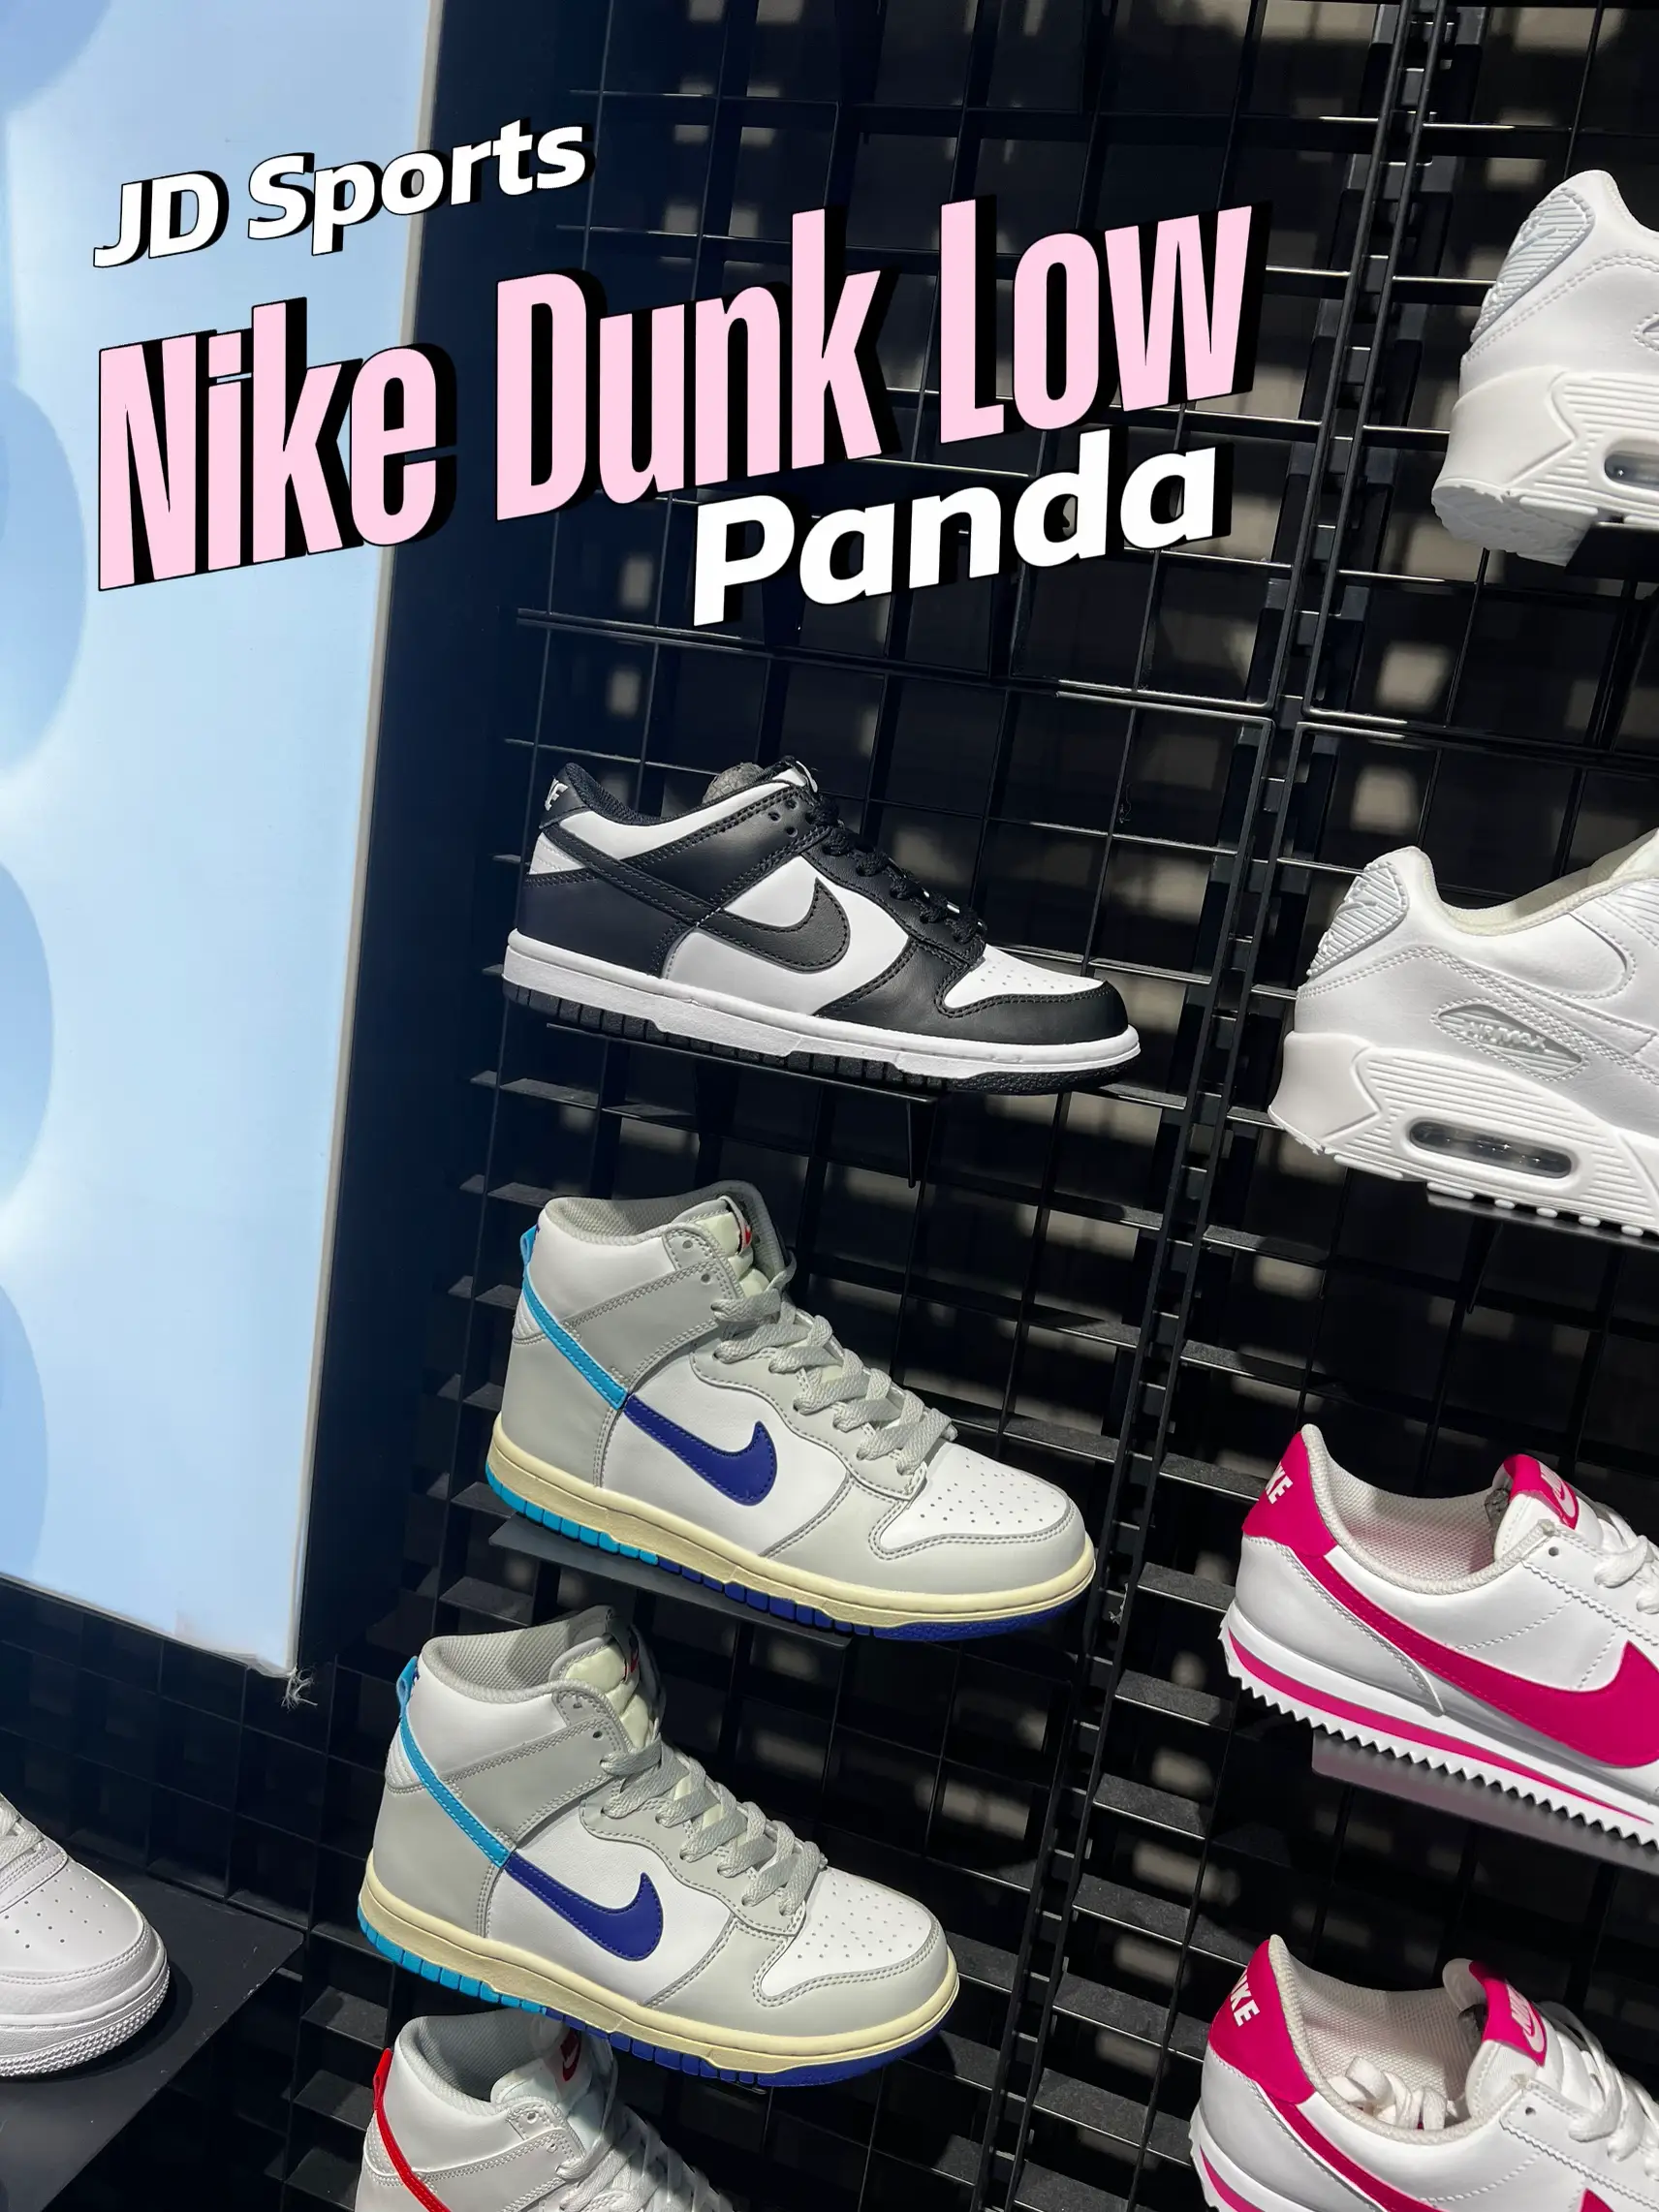 Nike Dunk Low🖤 (JD Sports)⚡️ | Gallery posted by 𝙋𝙧𝙘 𝙎𝙖𝙞 